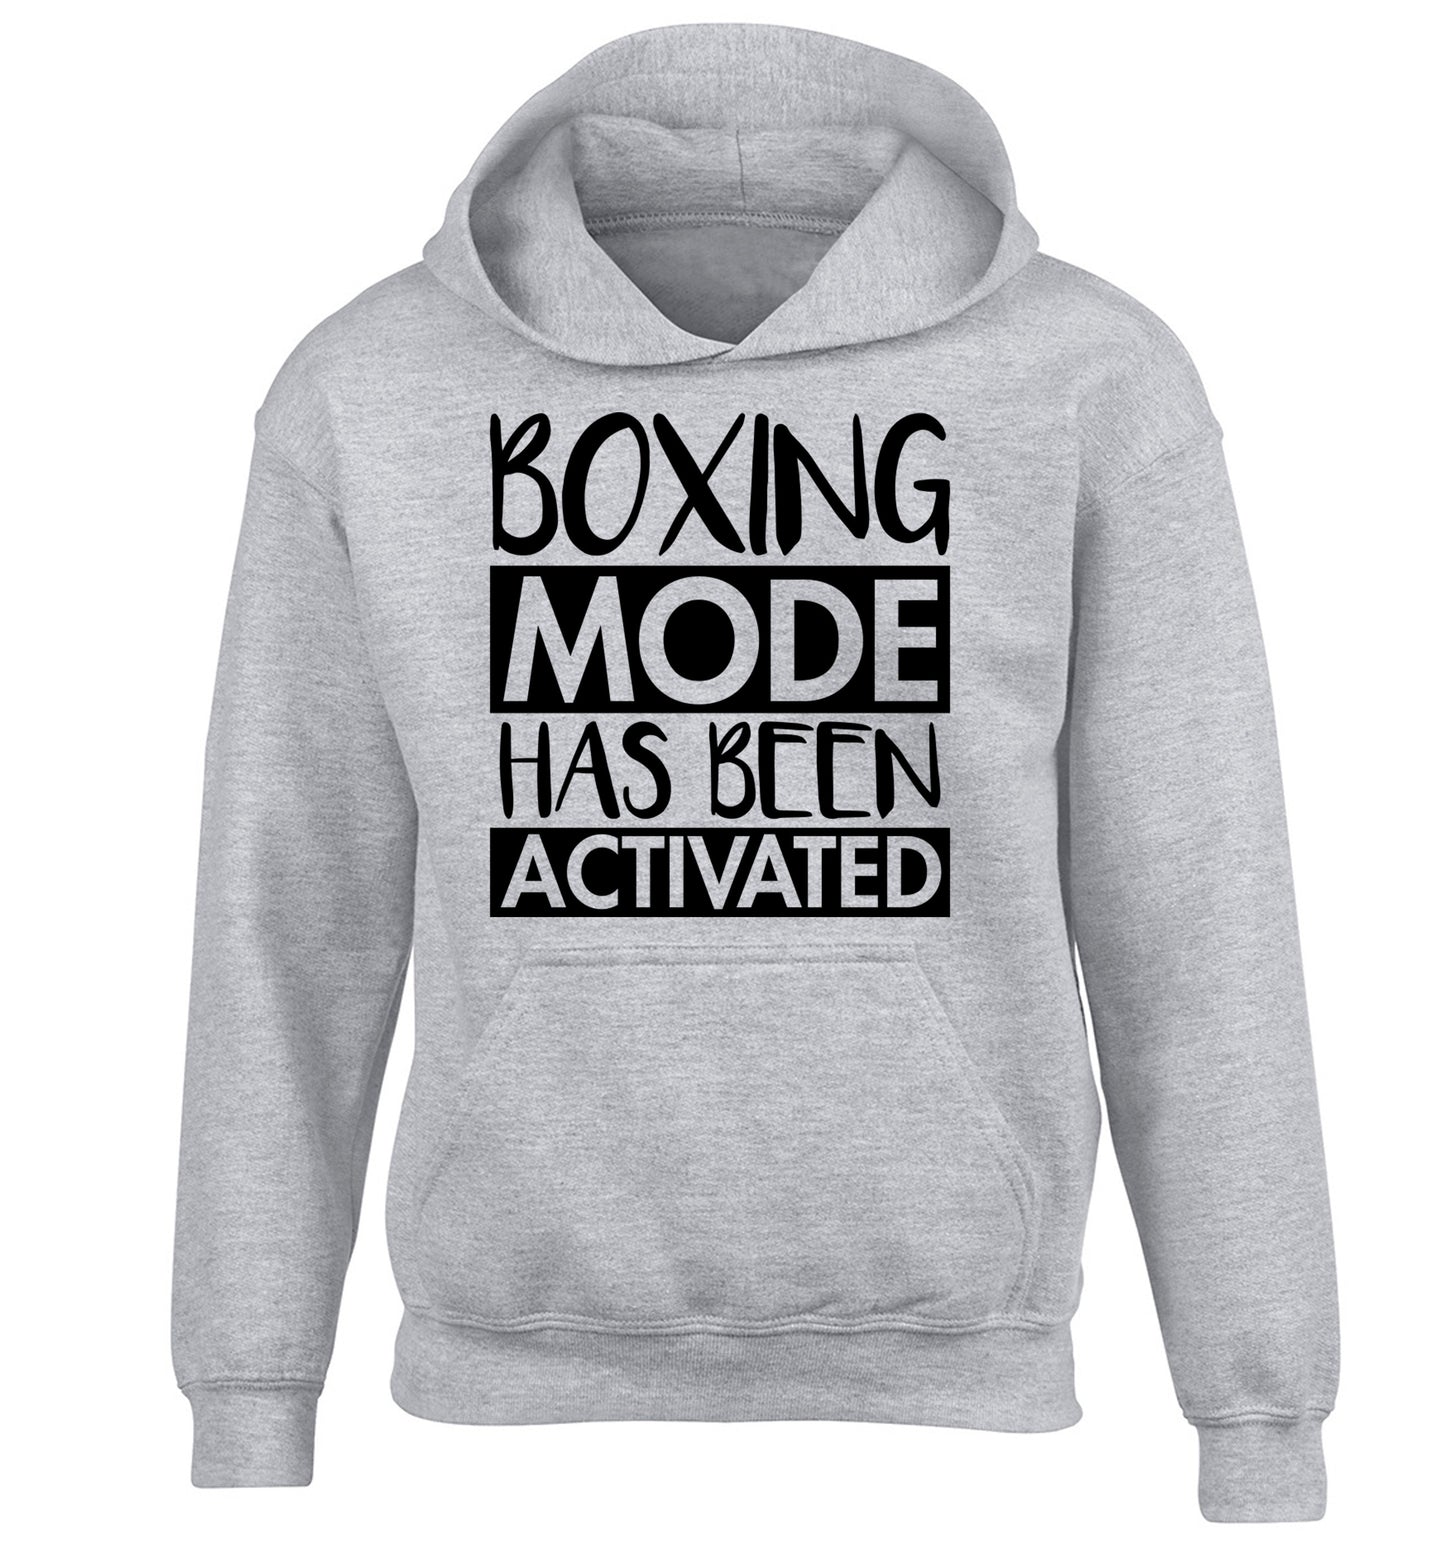 Boxing mode activated children's grey hoodie 12-14 Years